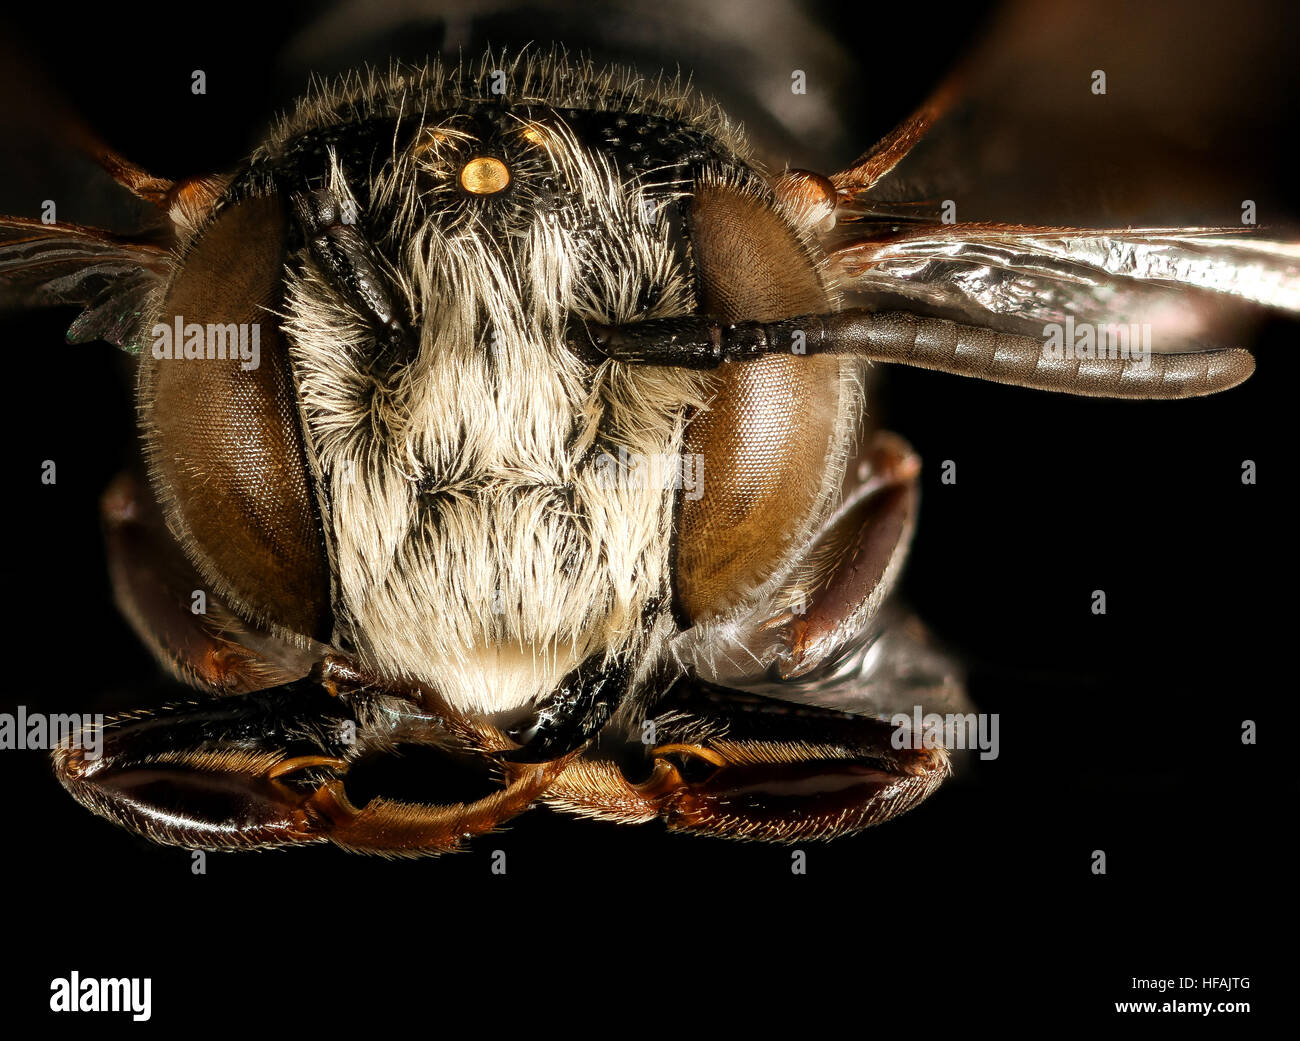 Coelioxys octodentata, m, face, Maryland 2016-04-07-15.41 Coelioxys octodentata, m, face, Maryland 2016-04-07-1541 26592654265 o Stock Photo